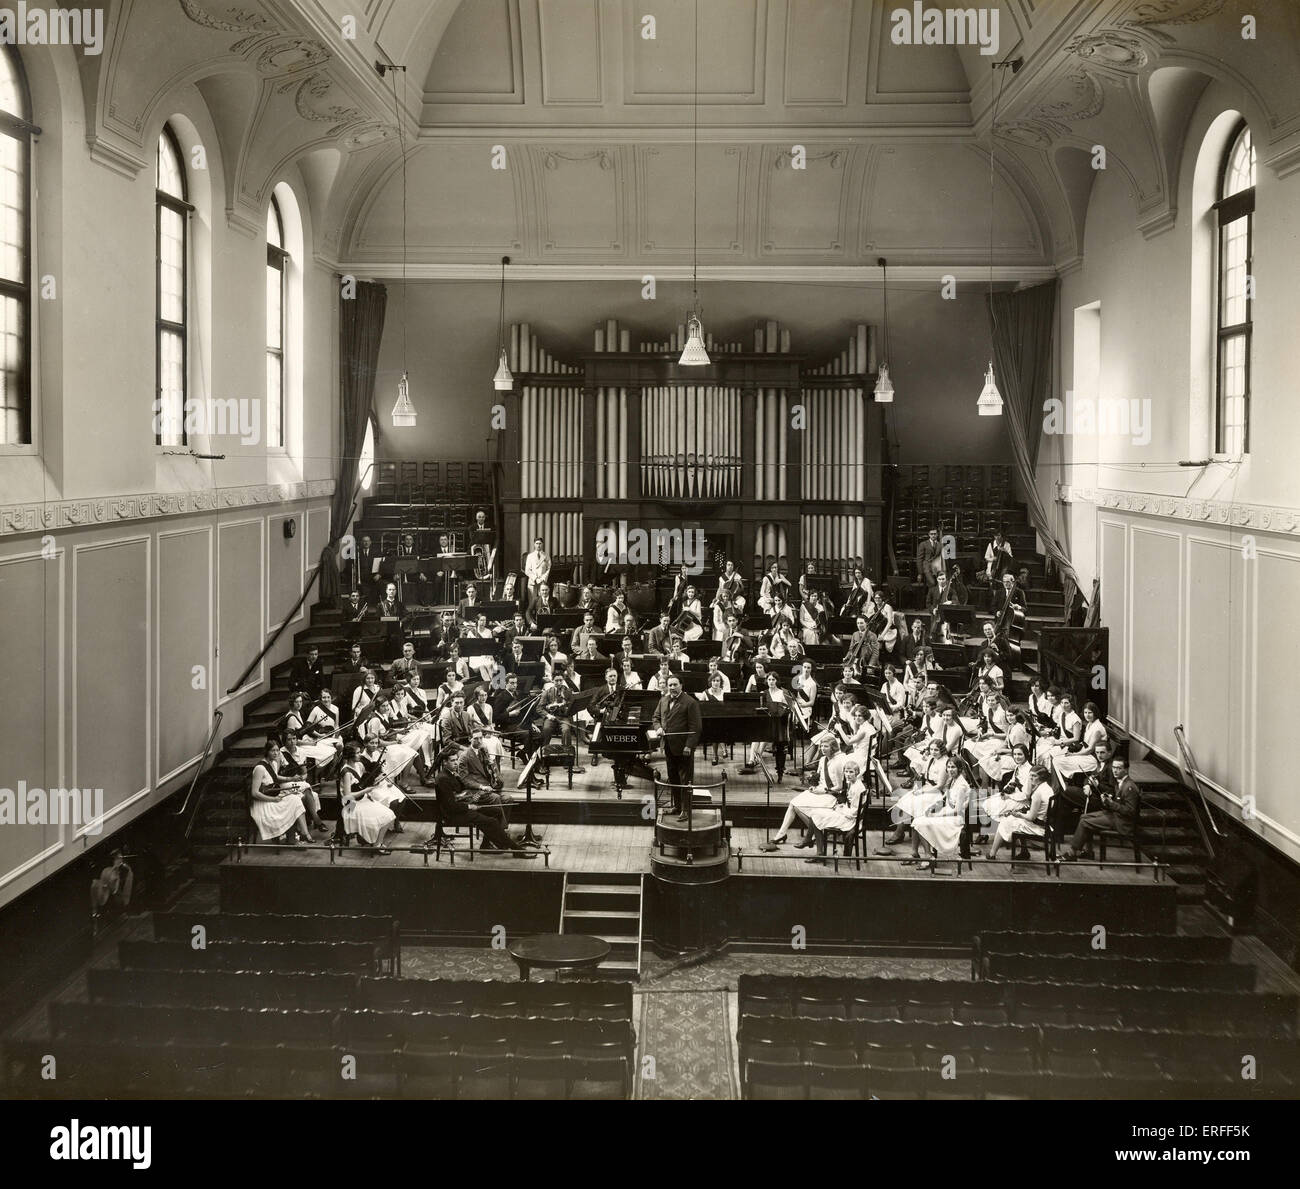 Henry Wood conducting the Royal Academy of Music Students' Orchestra, June 1930. Duke's Hall with organ. English conductor, Stock Photo